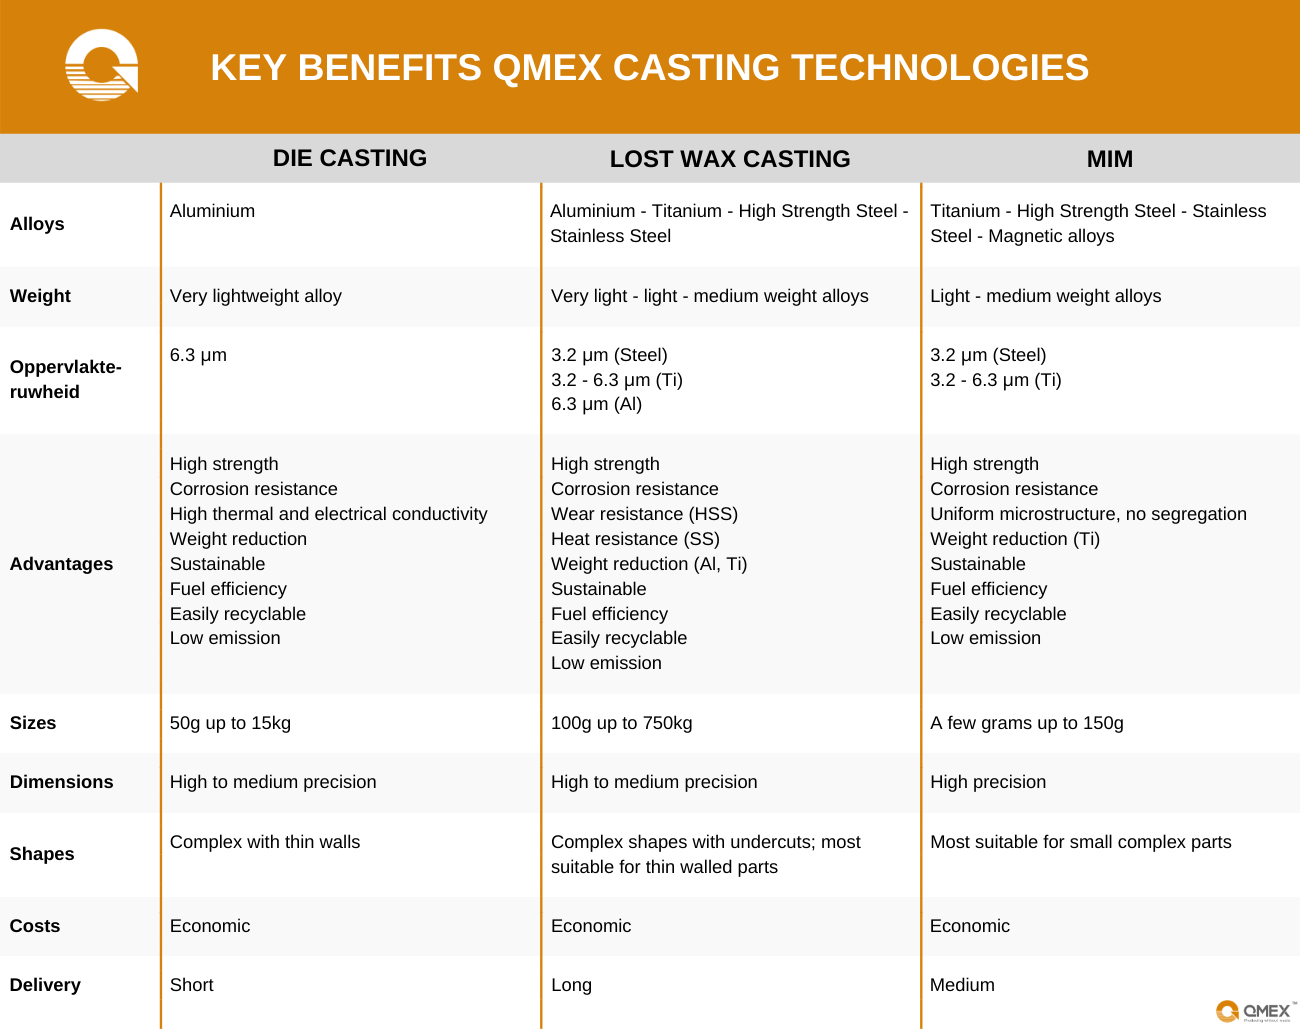 Key benefits QMEX casting technologies (without applications)